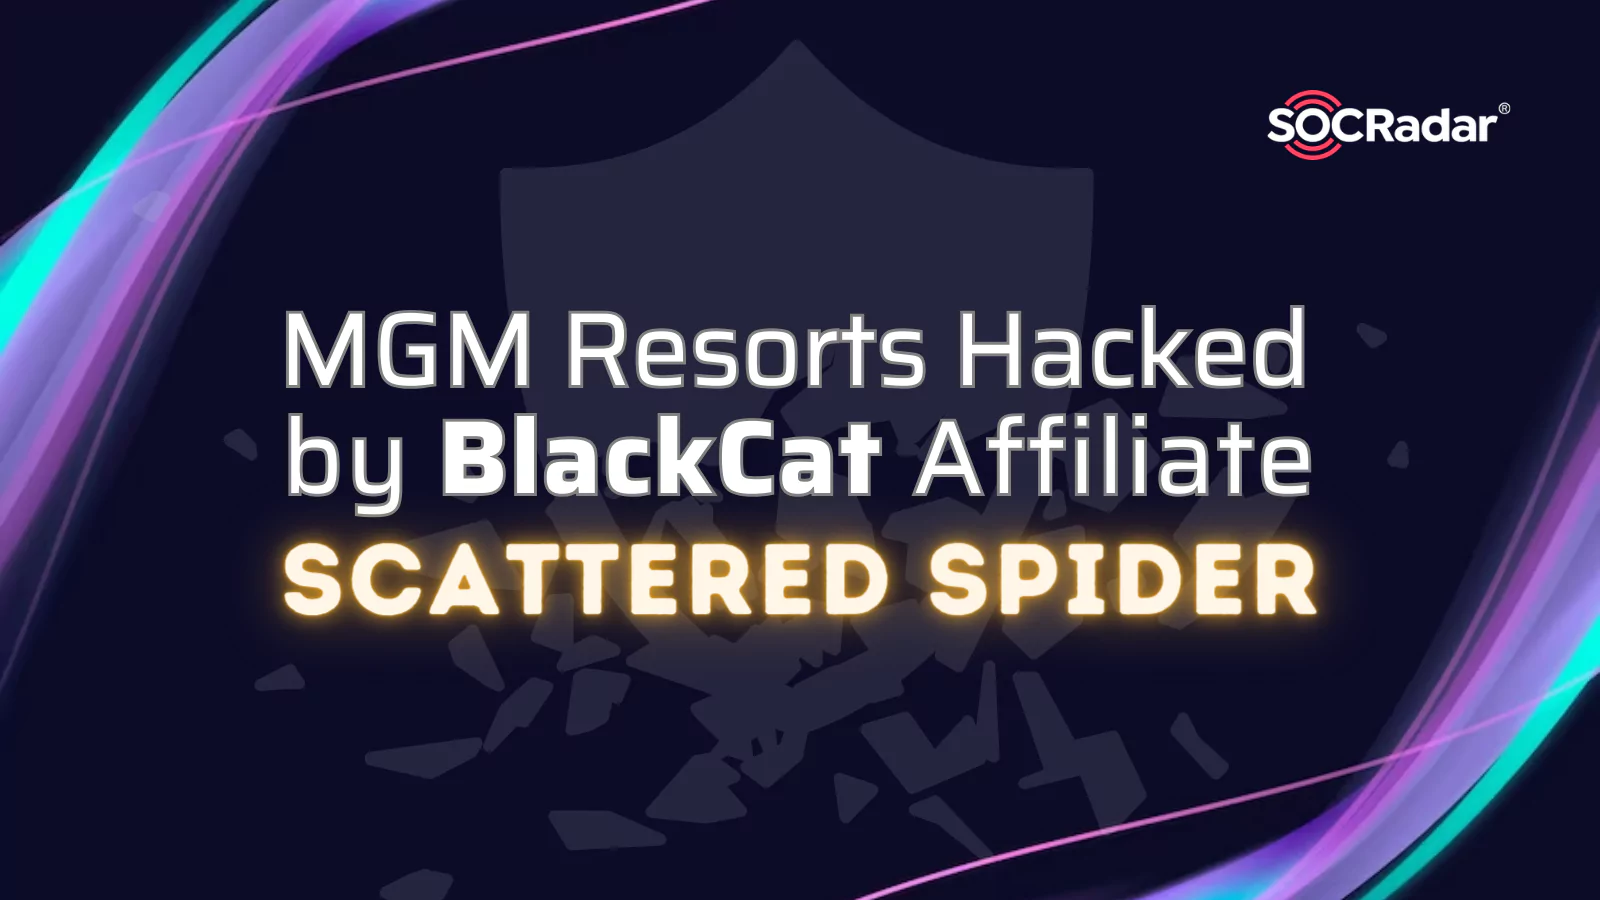 SOCRadar® Cyber Intelligence Inc. | MGM Resorts Hacked by BlackCat Affiliate, ‘Scattered Spider’